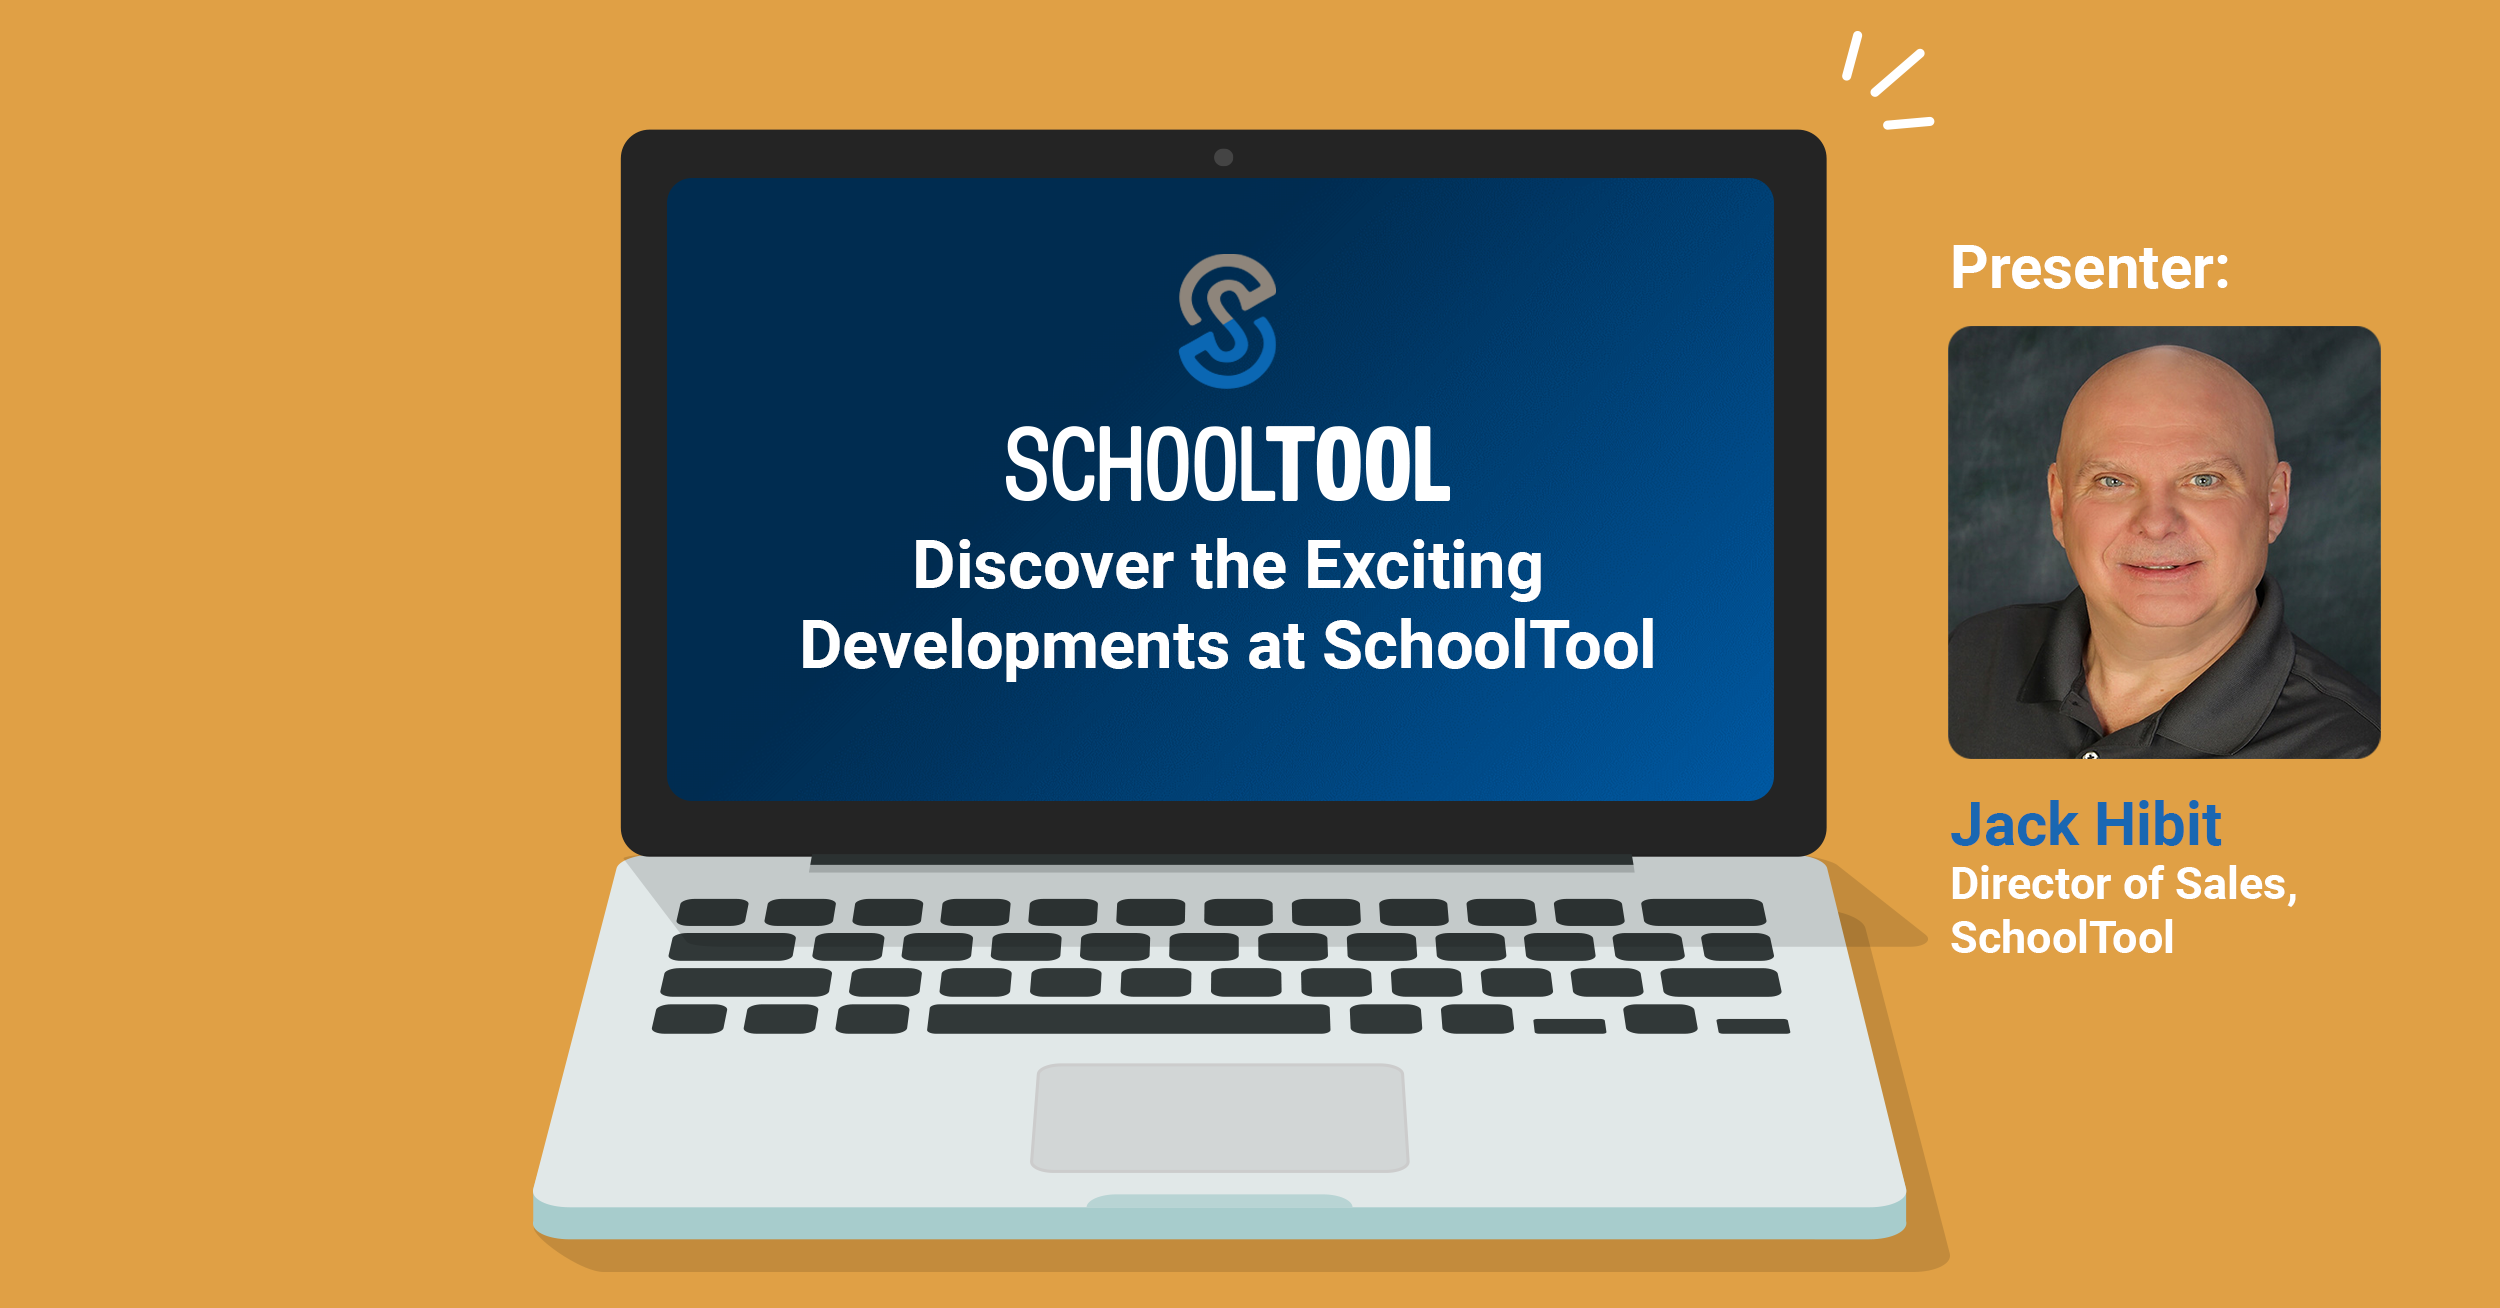 A laptop displaying SchoolTool's webinar titled 